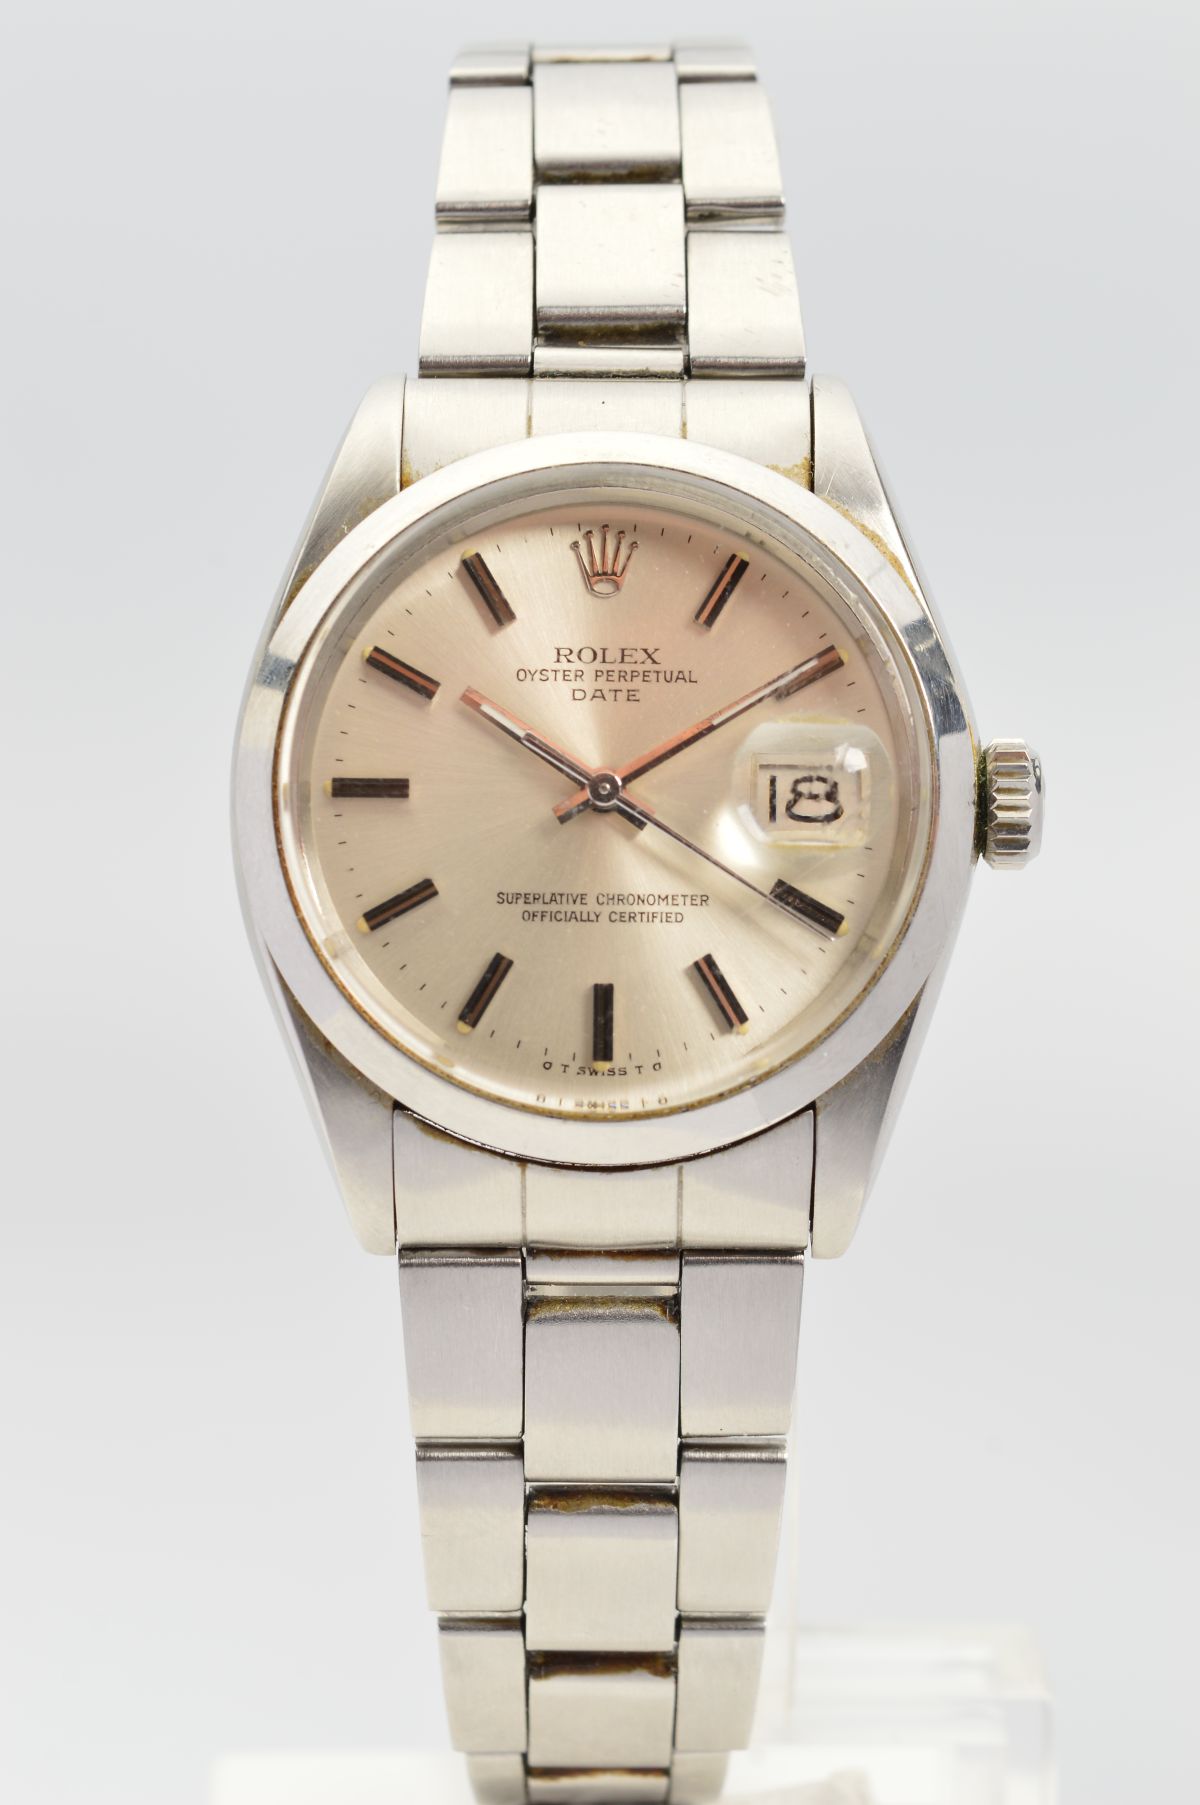 A ROLEX OYSTER PERPETUAL DATE WRISTWATCH, silvered dial with batons, cyclops lens at 3 o'clock,